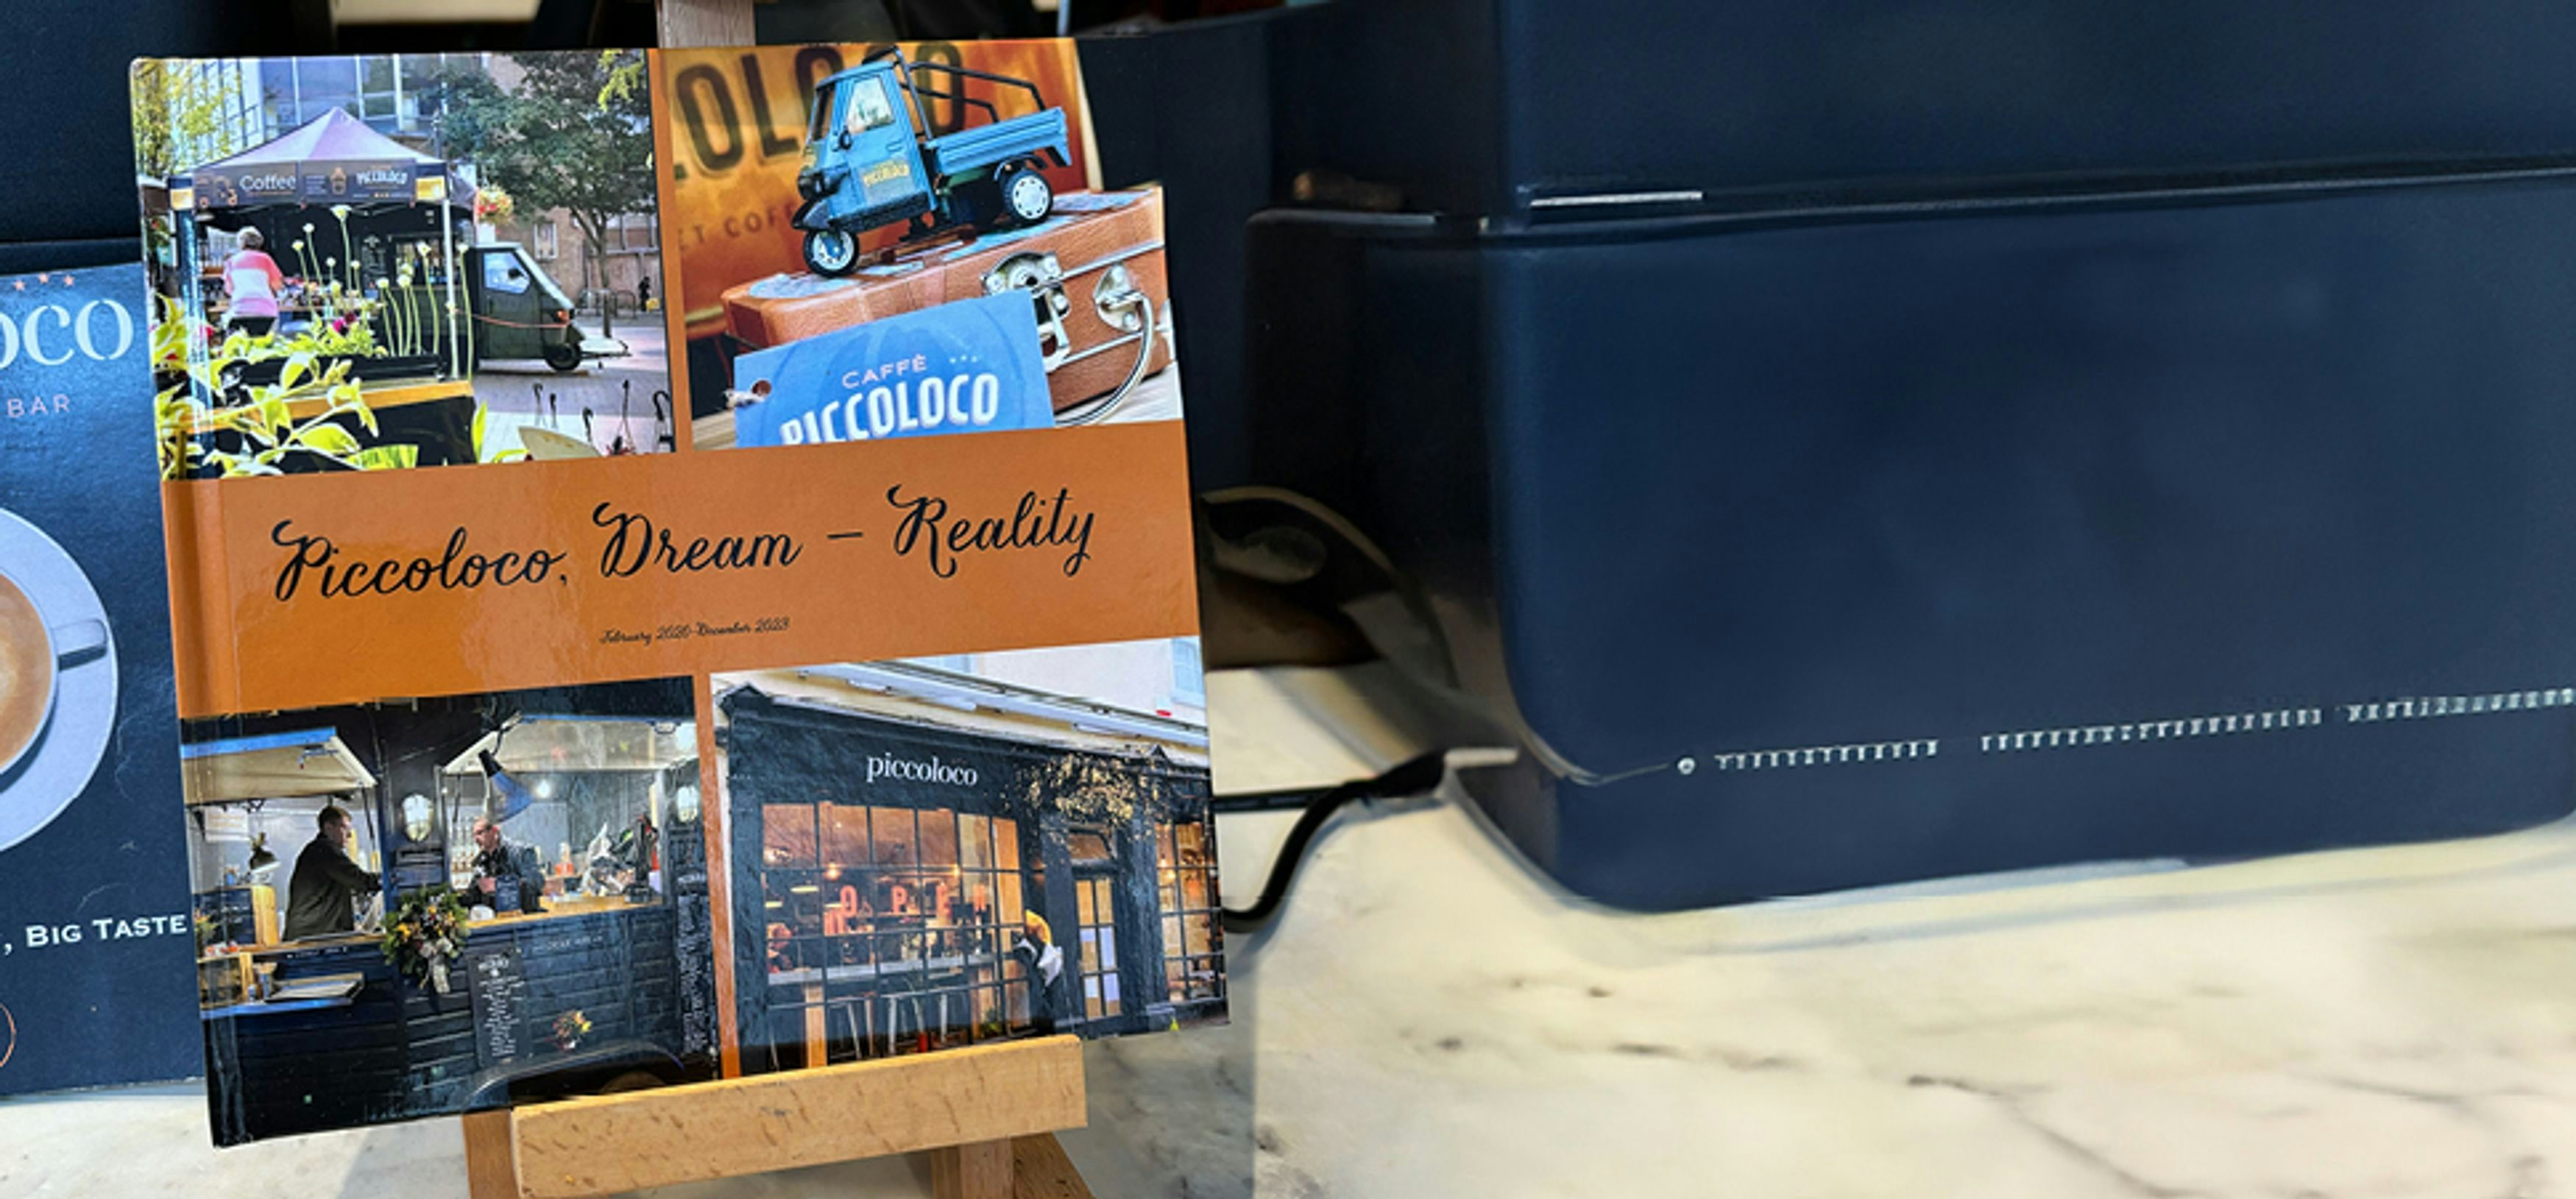 Book on small stand which shows the journey of Piccoloco - "Dream to reality"